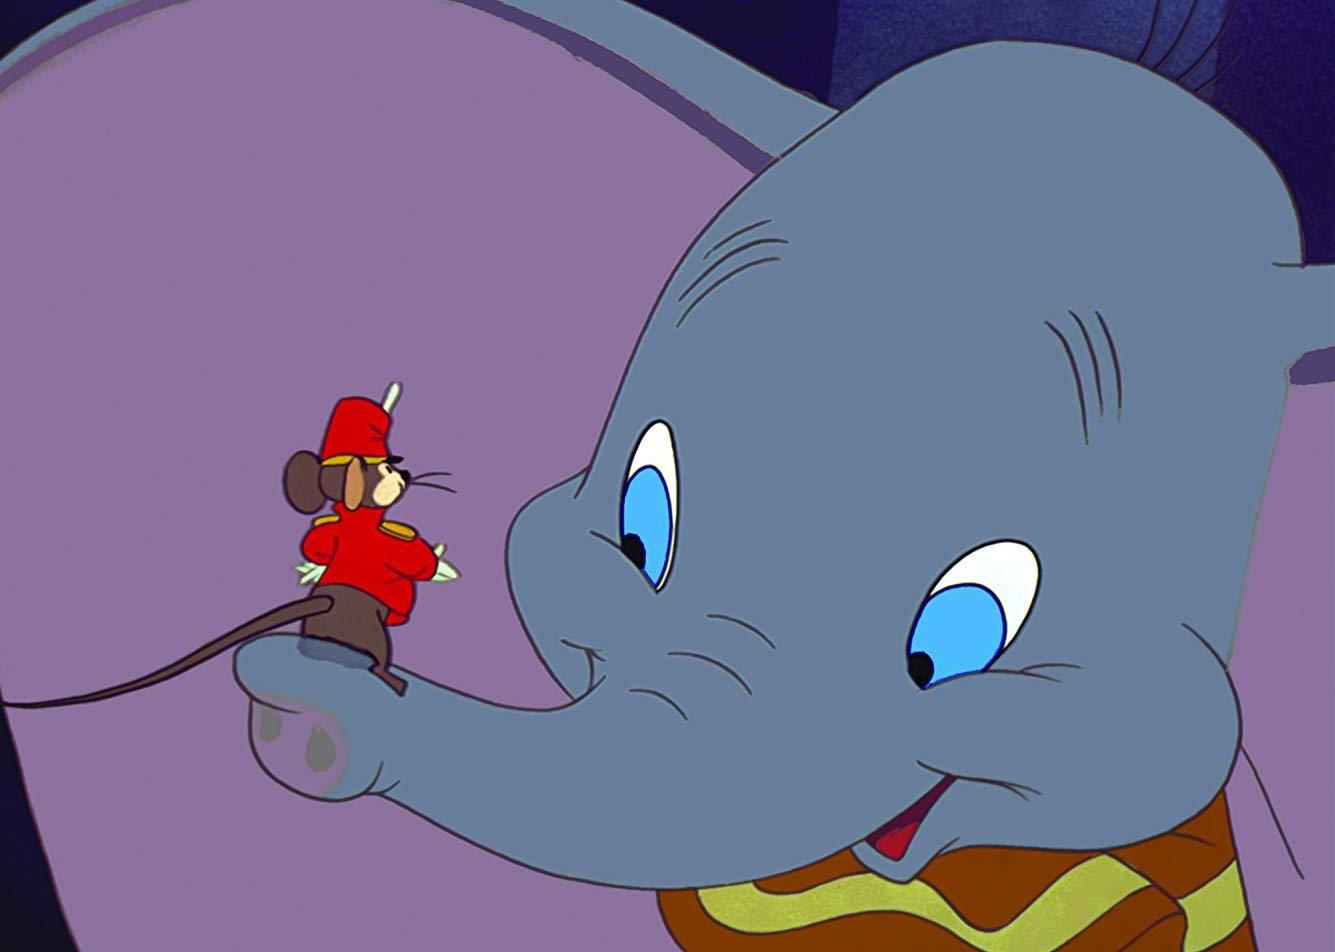 A cartoon of an elephant with a dressed up mouse on it's trunk.